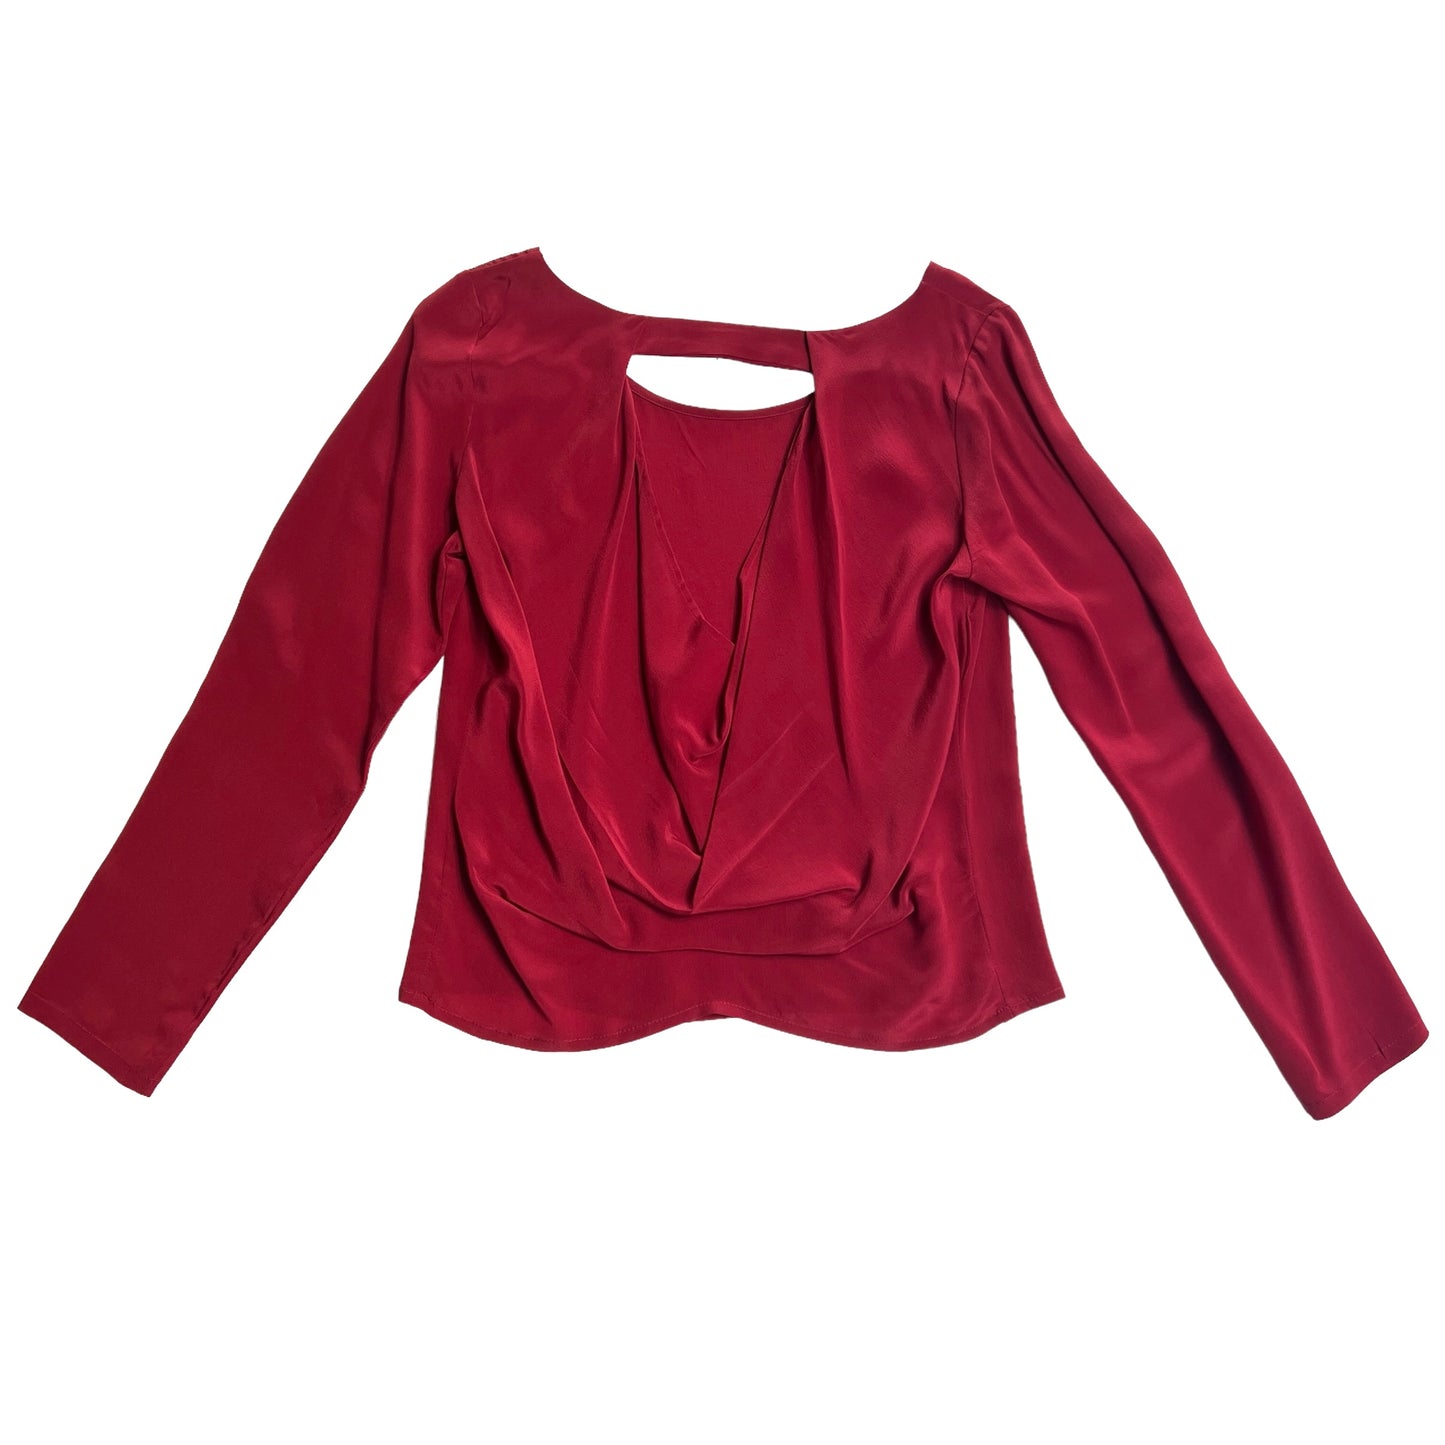 Red Silk Blouse - S